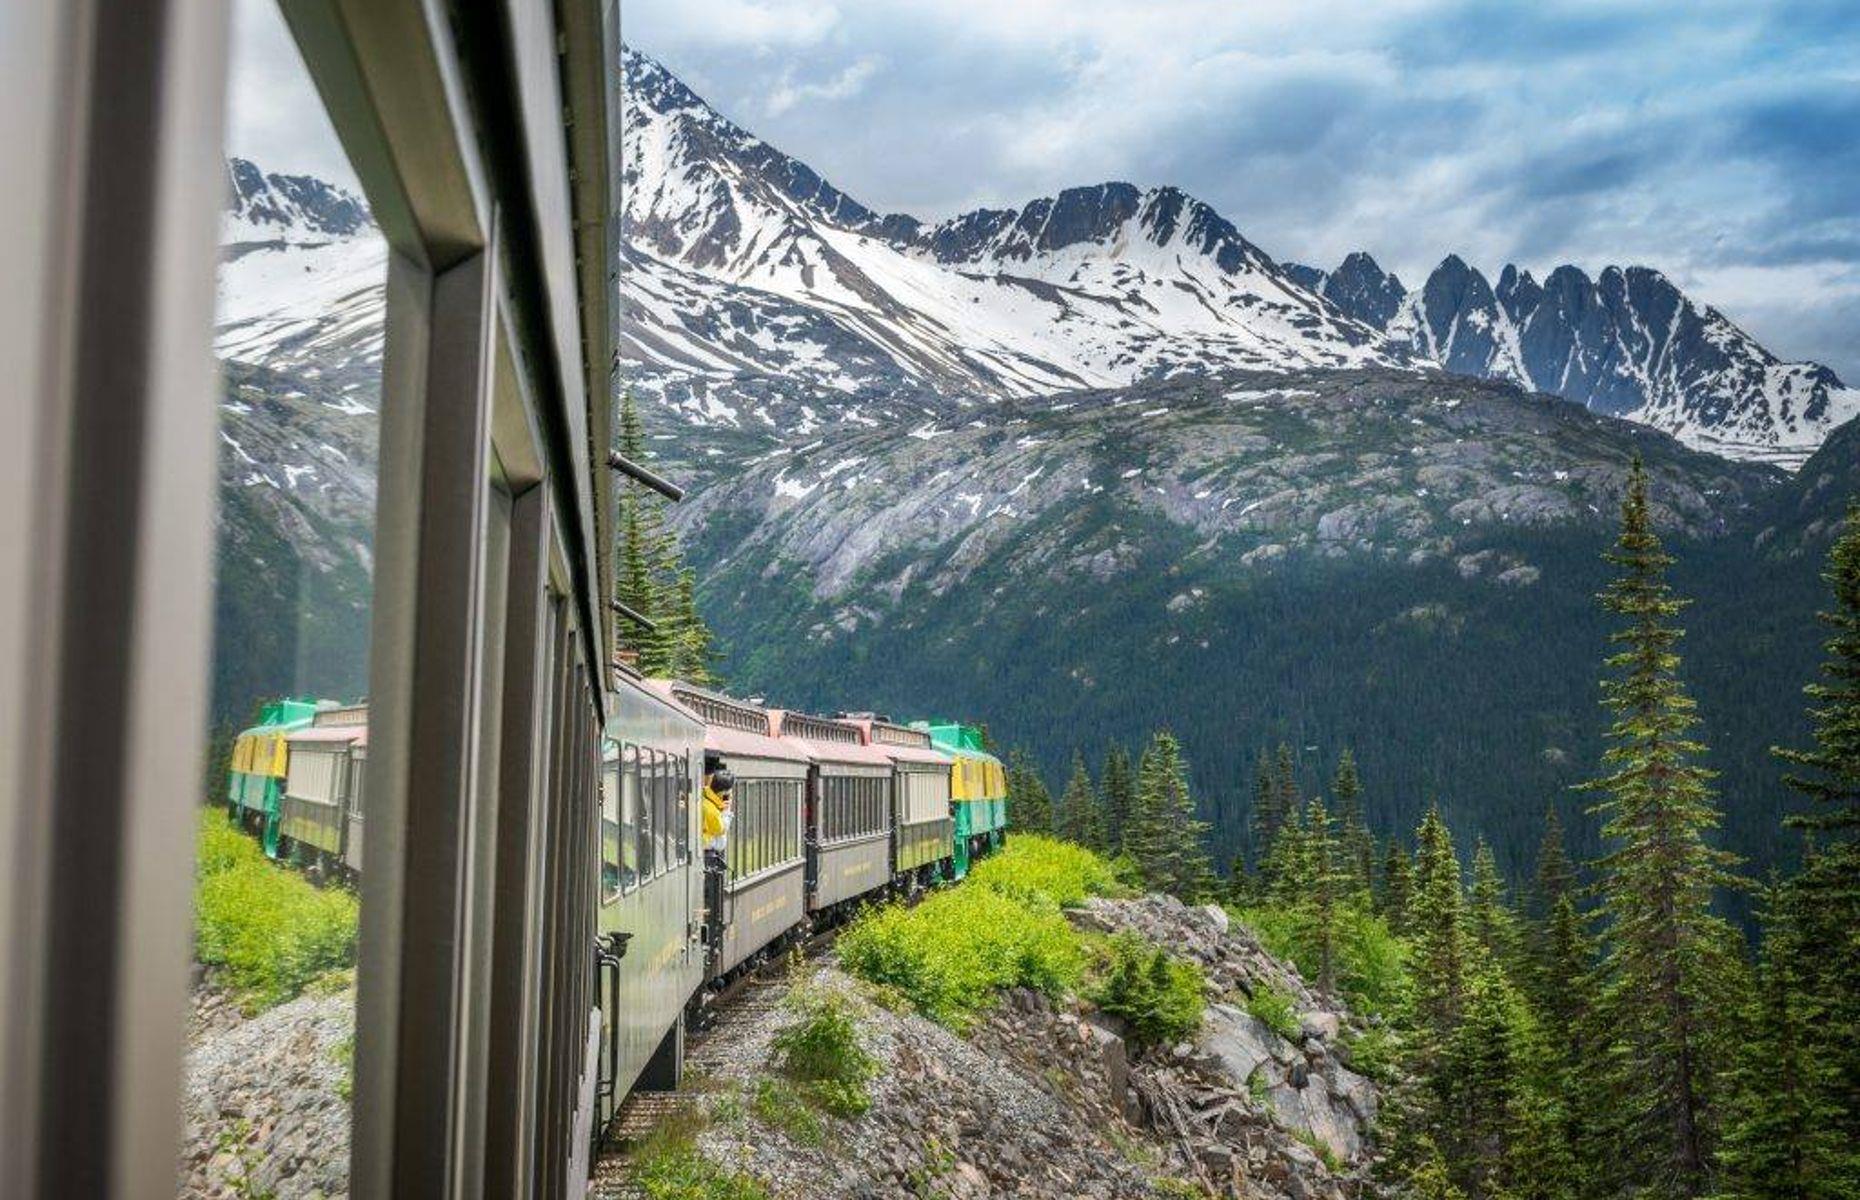 <p>Want to feel like you’re on top of the world? A journey on the unforgettable <a href="https://wpyr.com/">White Pass & Yukon</a>, which climbs nearly 3,000 feet (914m) from Skagway, Alaska to White Pass Summit in Canada’s Yukon territory, should do the trick. The 40-mile (64km), 2.5-hour round trip also takes place on a historic railroad dating back to 1898, when it was built to give greater access to mines at the time of the Klondike Gold Rush.</p>